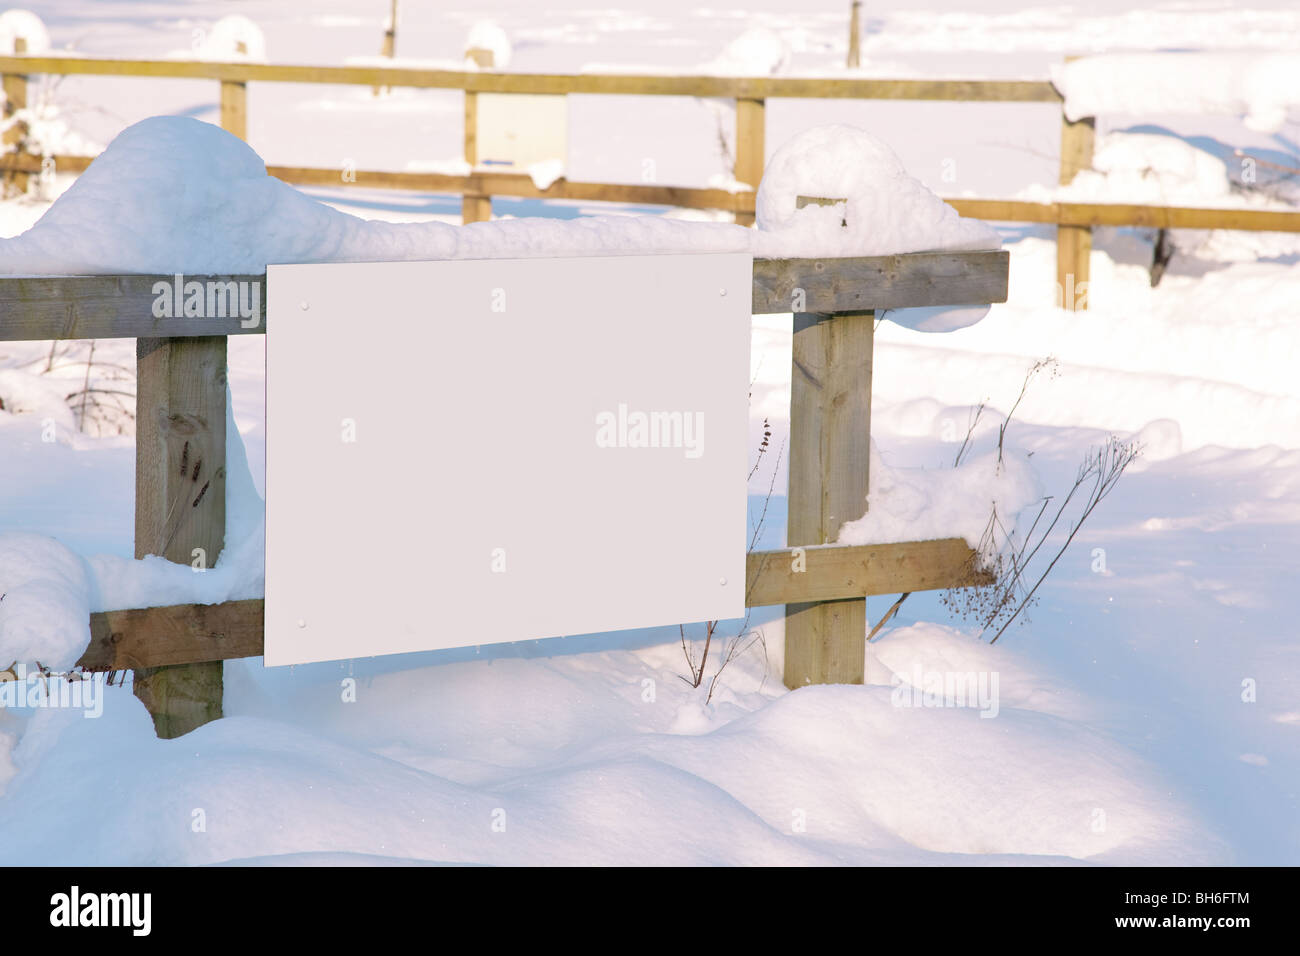 A blank white sign on a fence after recent snow fall, add your own message. Stock Photo